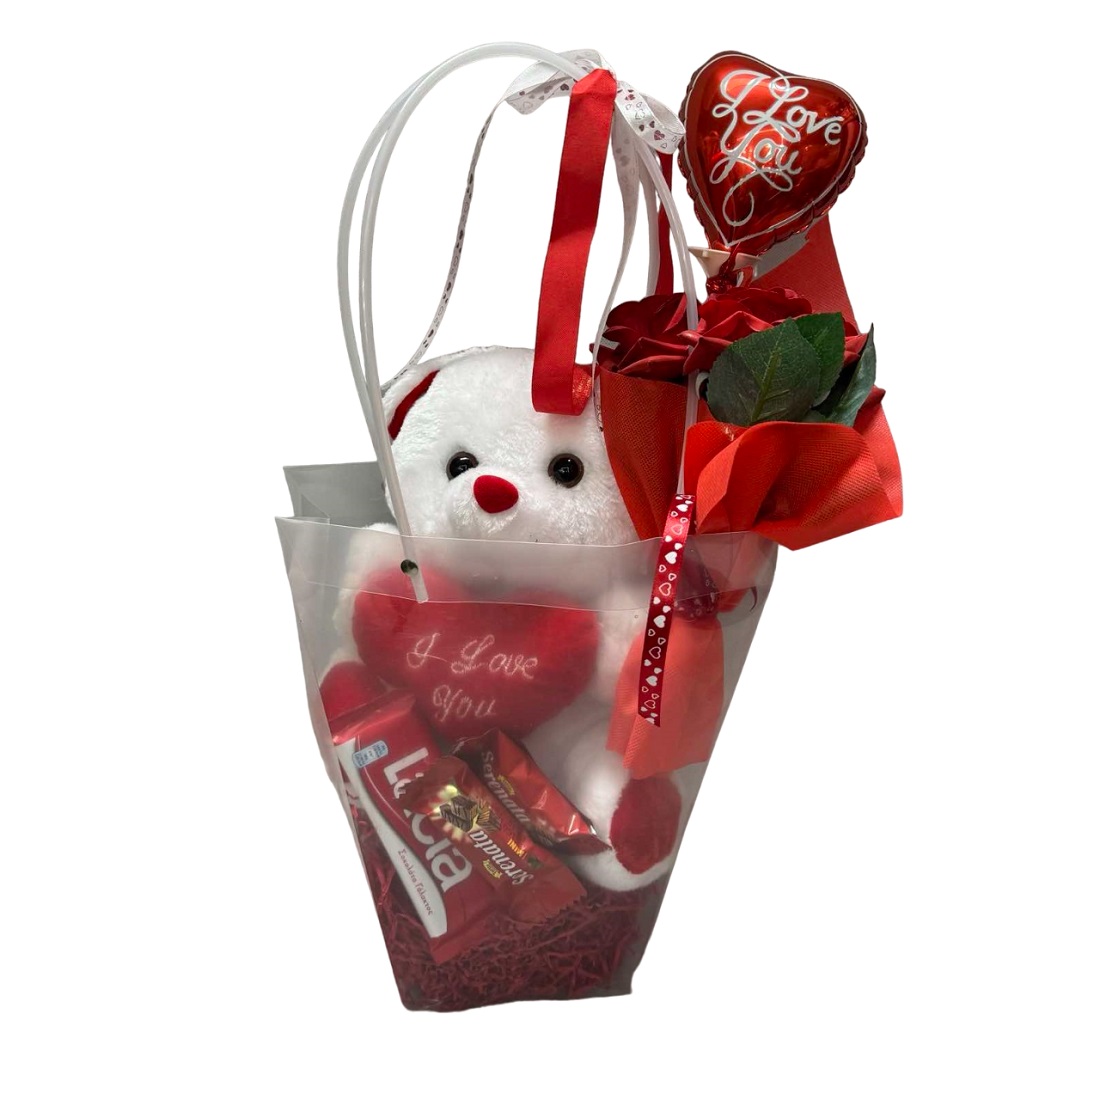 valentines-day-gift-bag-with-teddy-bear-balloon-and-chocolate